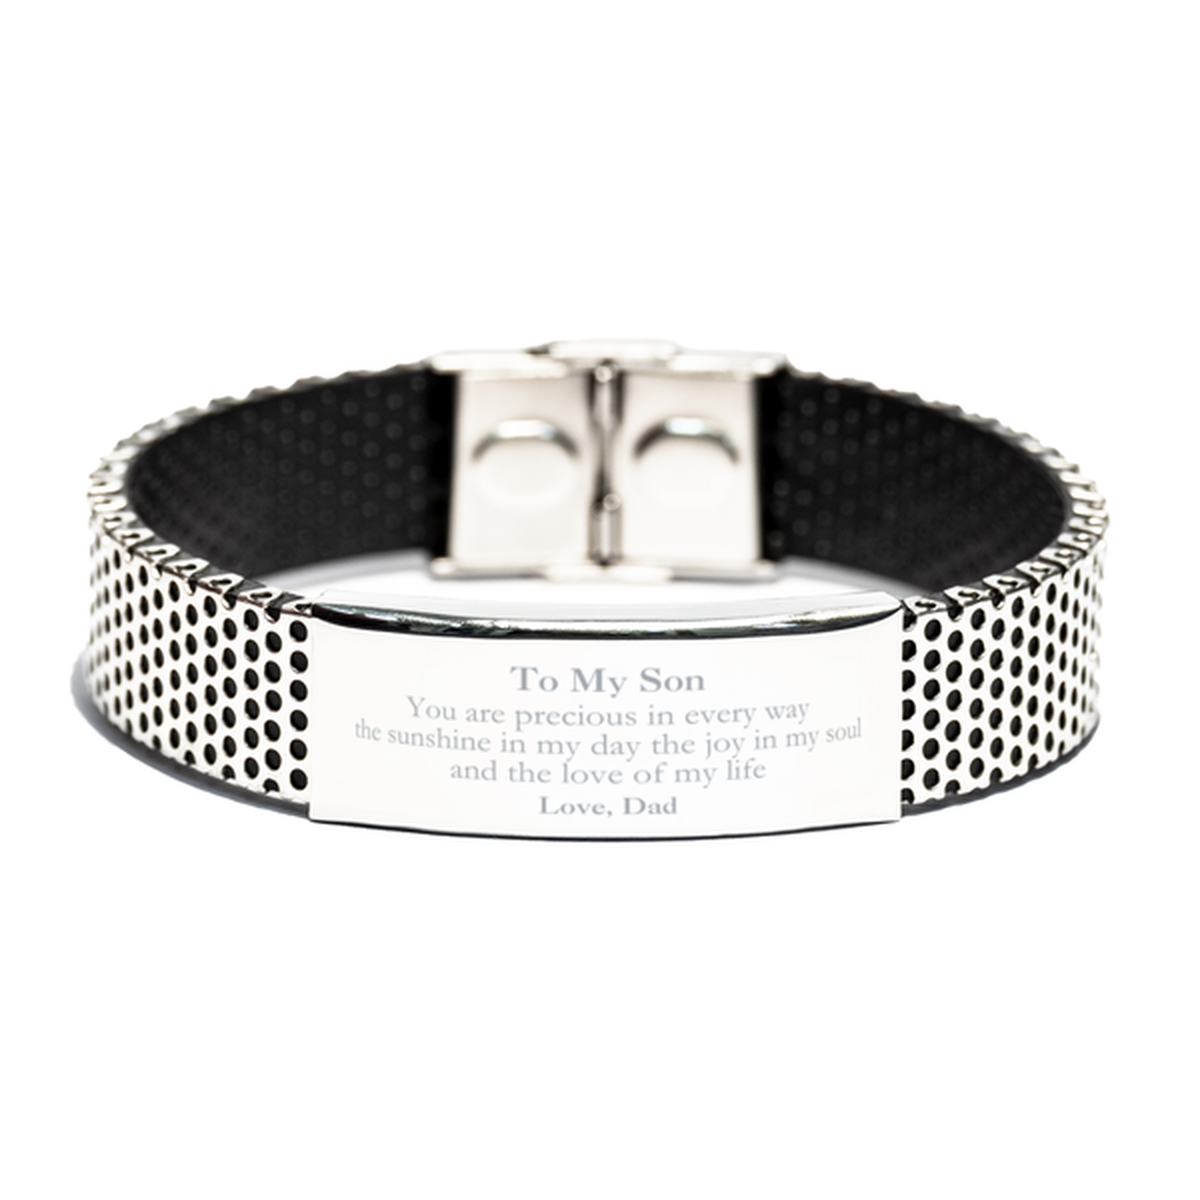 Graduation Gifts for Son Stainless Steel Bracelet Present from Dad, Christmas Son Birthday Gifts Son You are precious in every way the sunshine in my day. Love, Dad